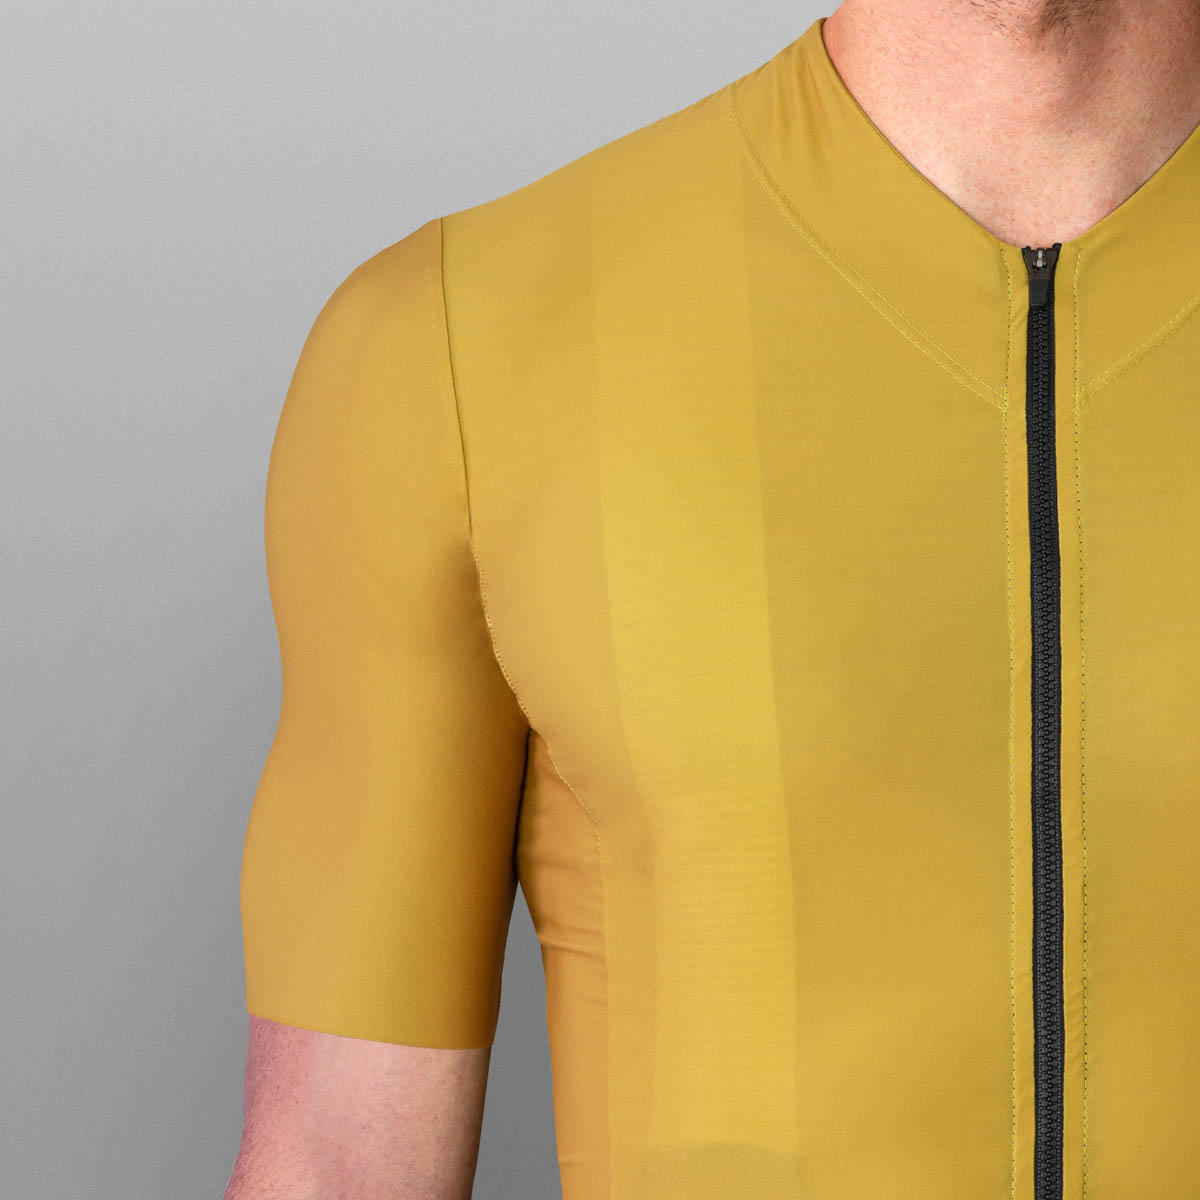 slim race fit cycling jersey in all clean lime style